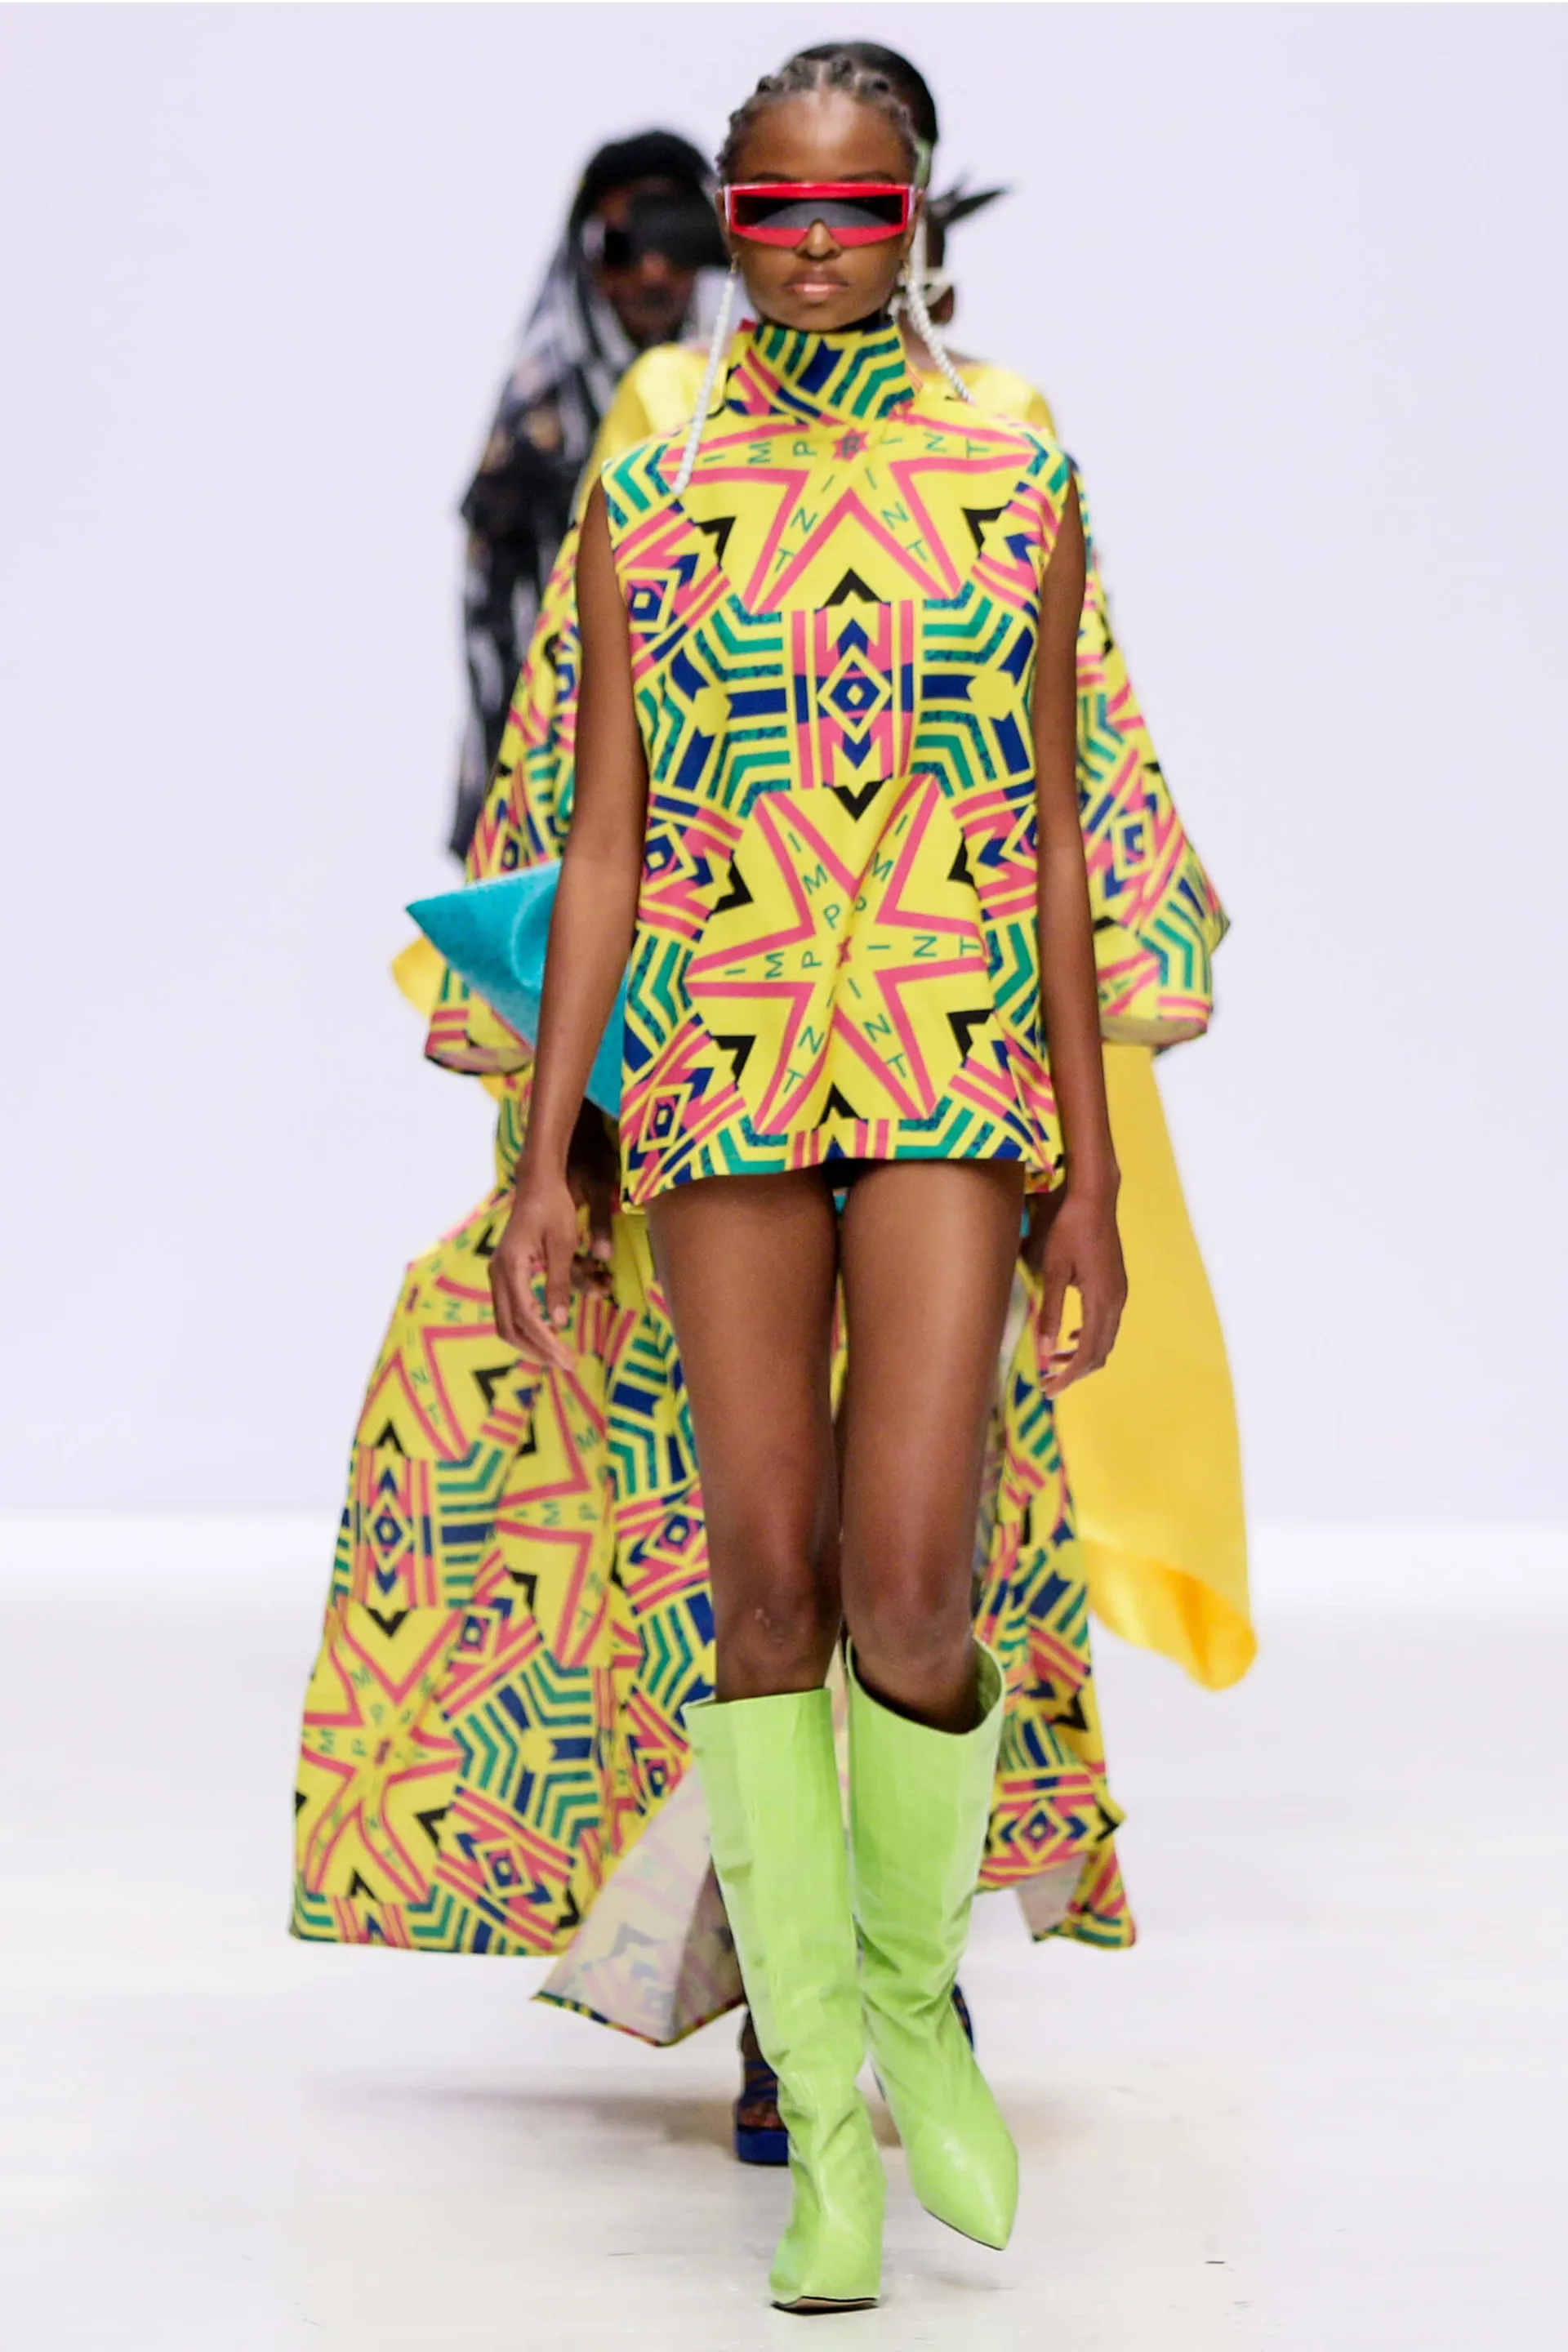 African Fashion Rising: A Global Movement of Style, Identity, and Empowerment